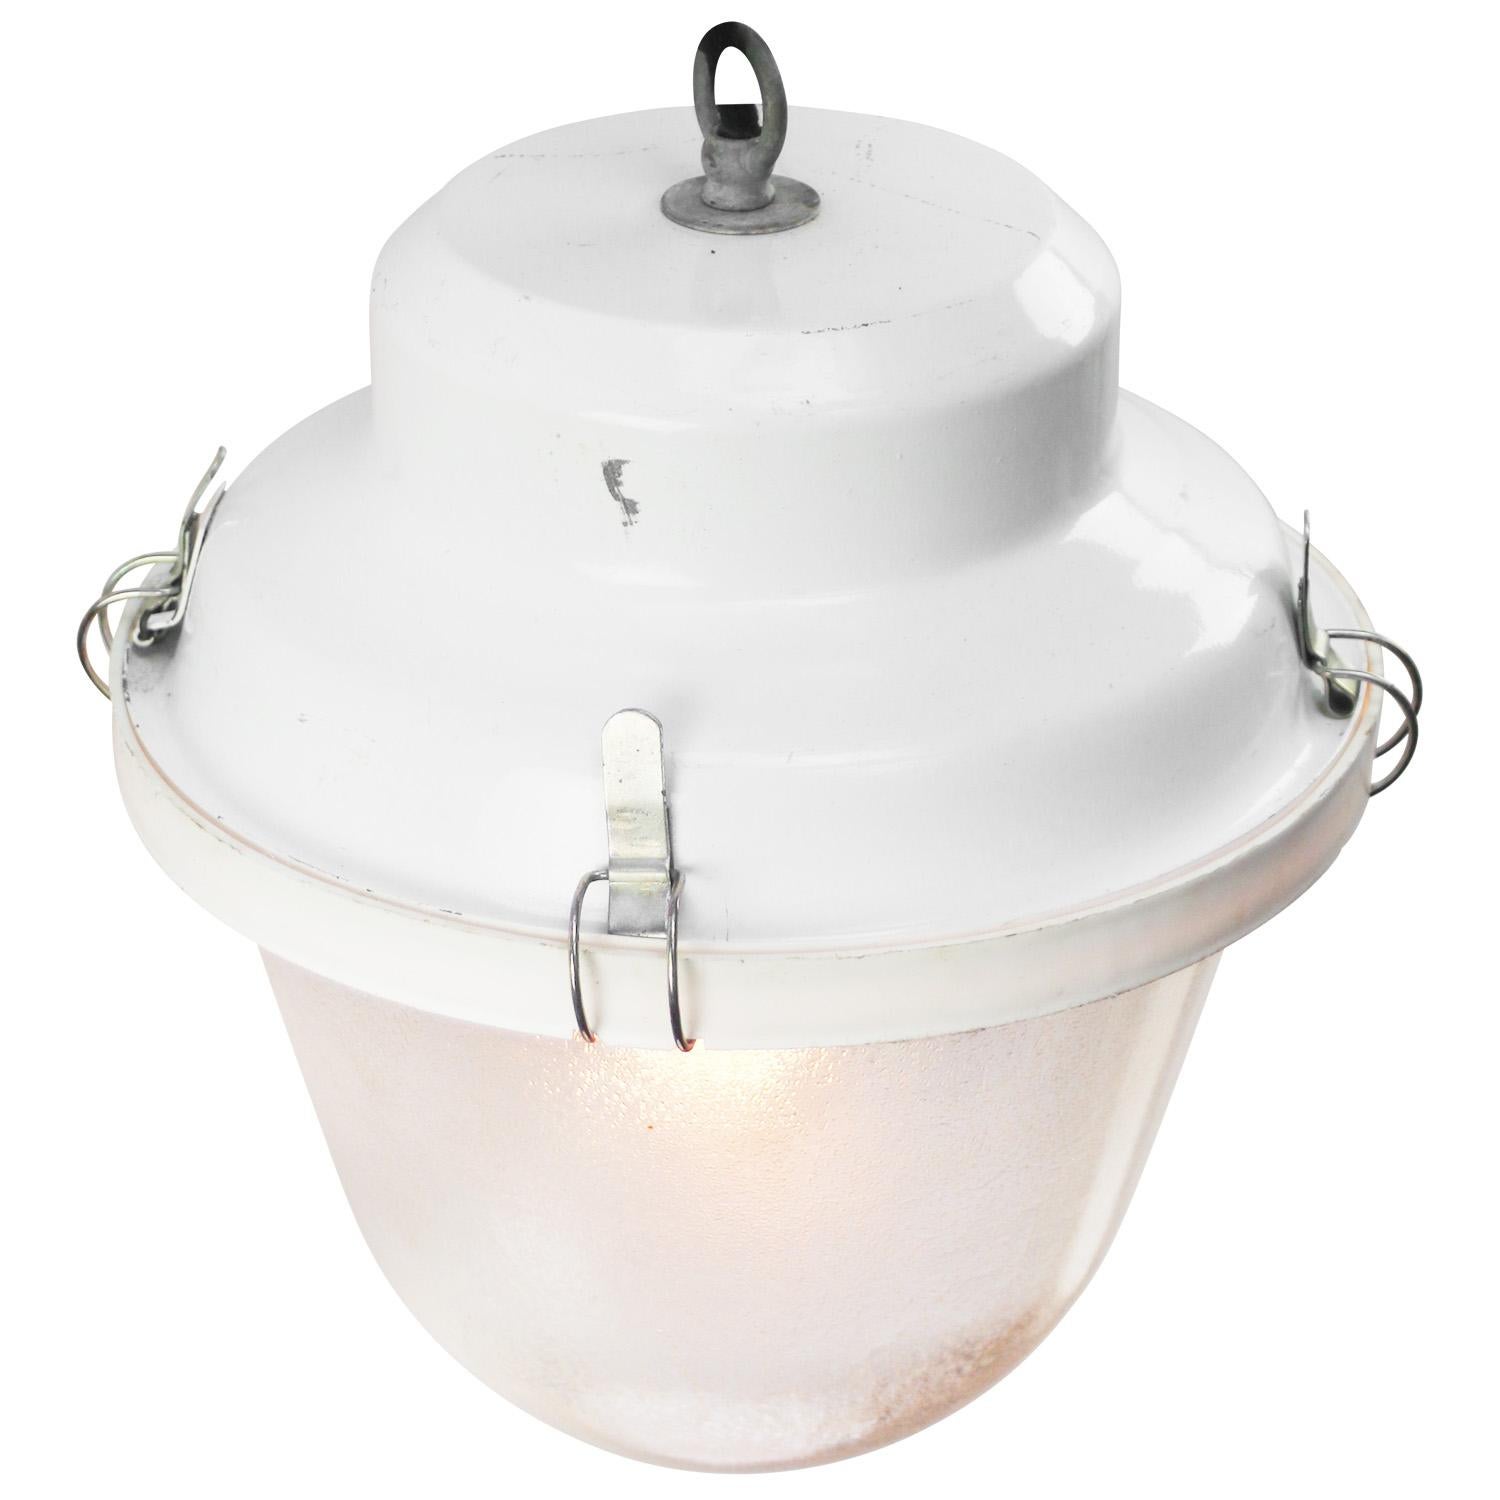 White industrial hanging lamp
White metal top, white plastic ring with frosted glass

Weight: 3.60 kg / 7.9 lb

Priced per individual item. All lamps have been made suitable by international standards for incandescent light bulbs, energy-efficient